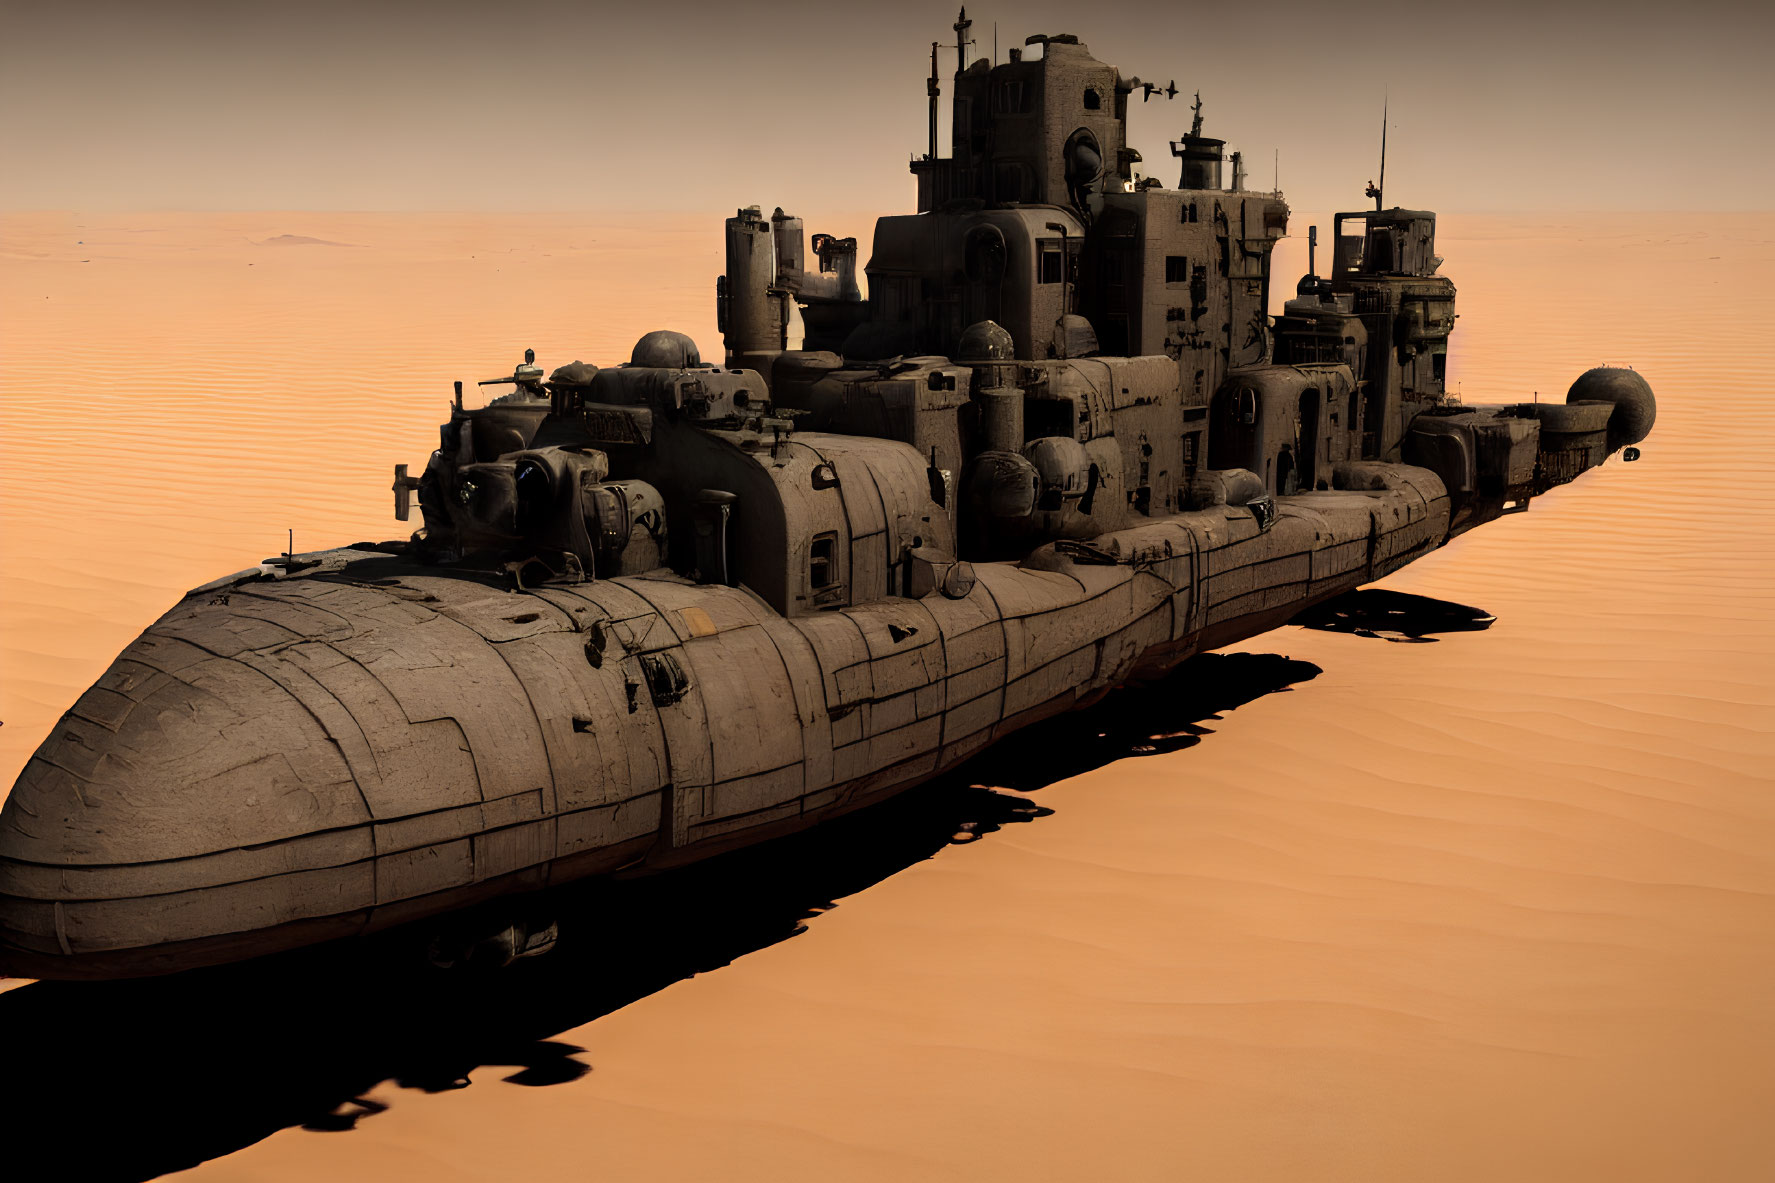 Abandoned submarine in desert with sand dunes and hazy sky